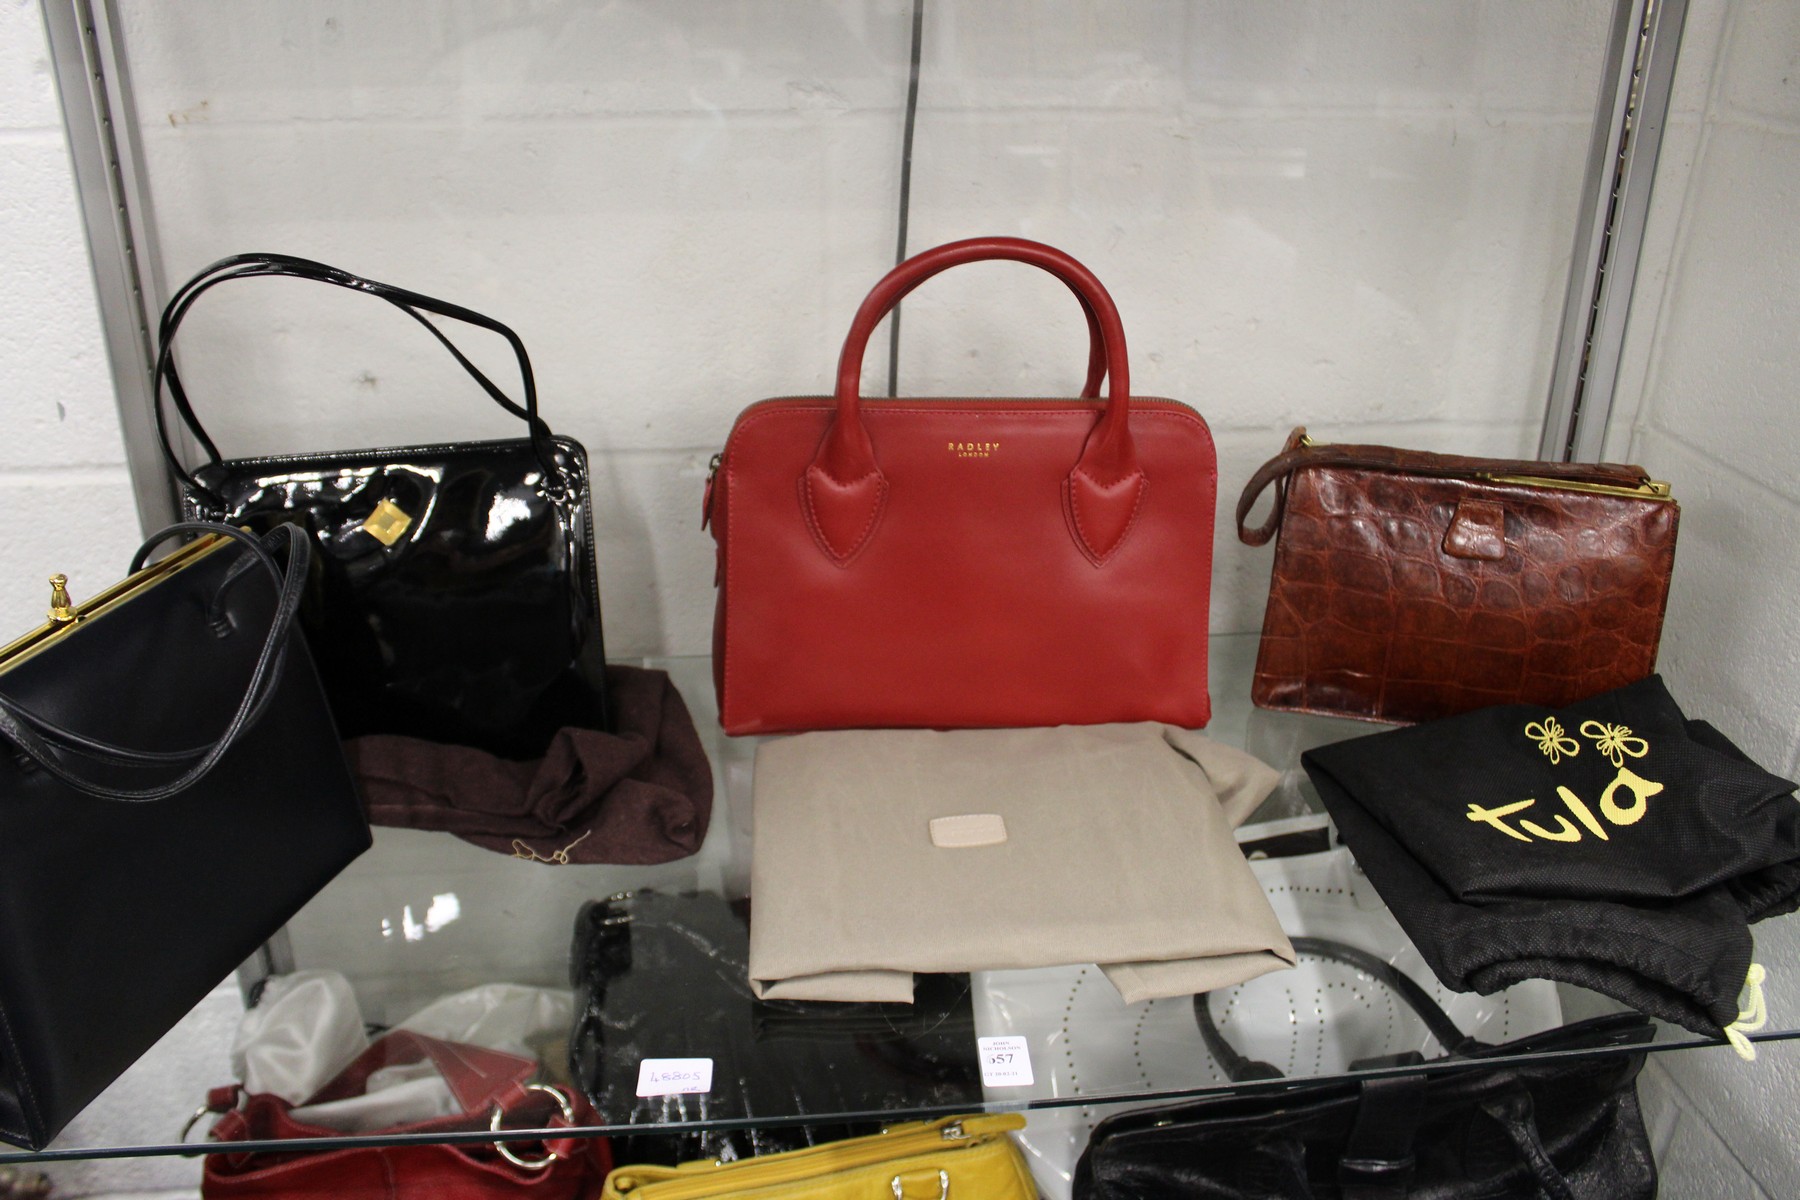 A Radley red leather handbag and three other bags.